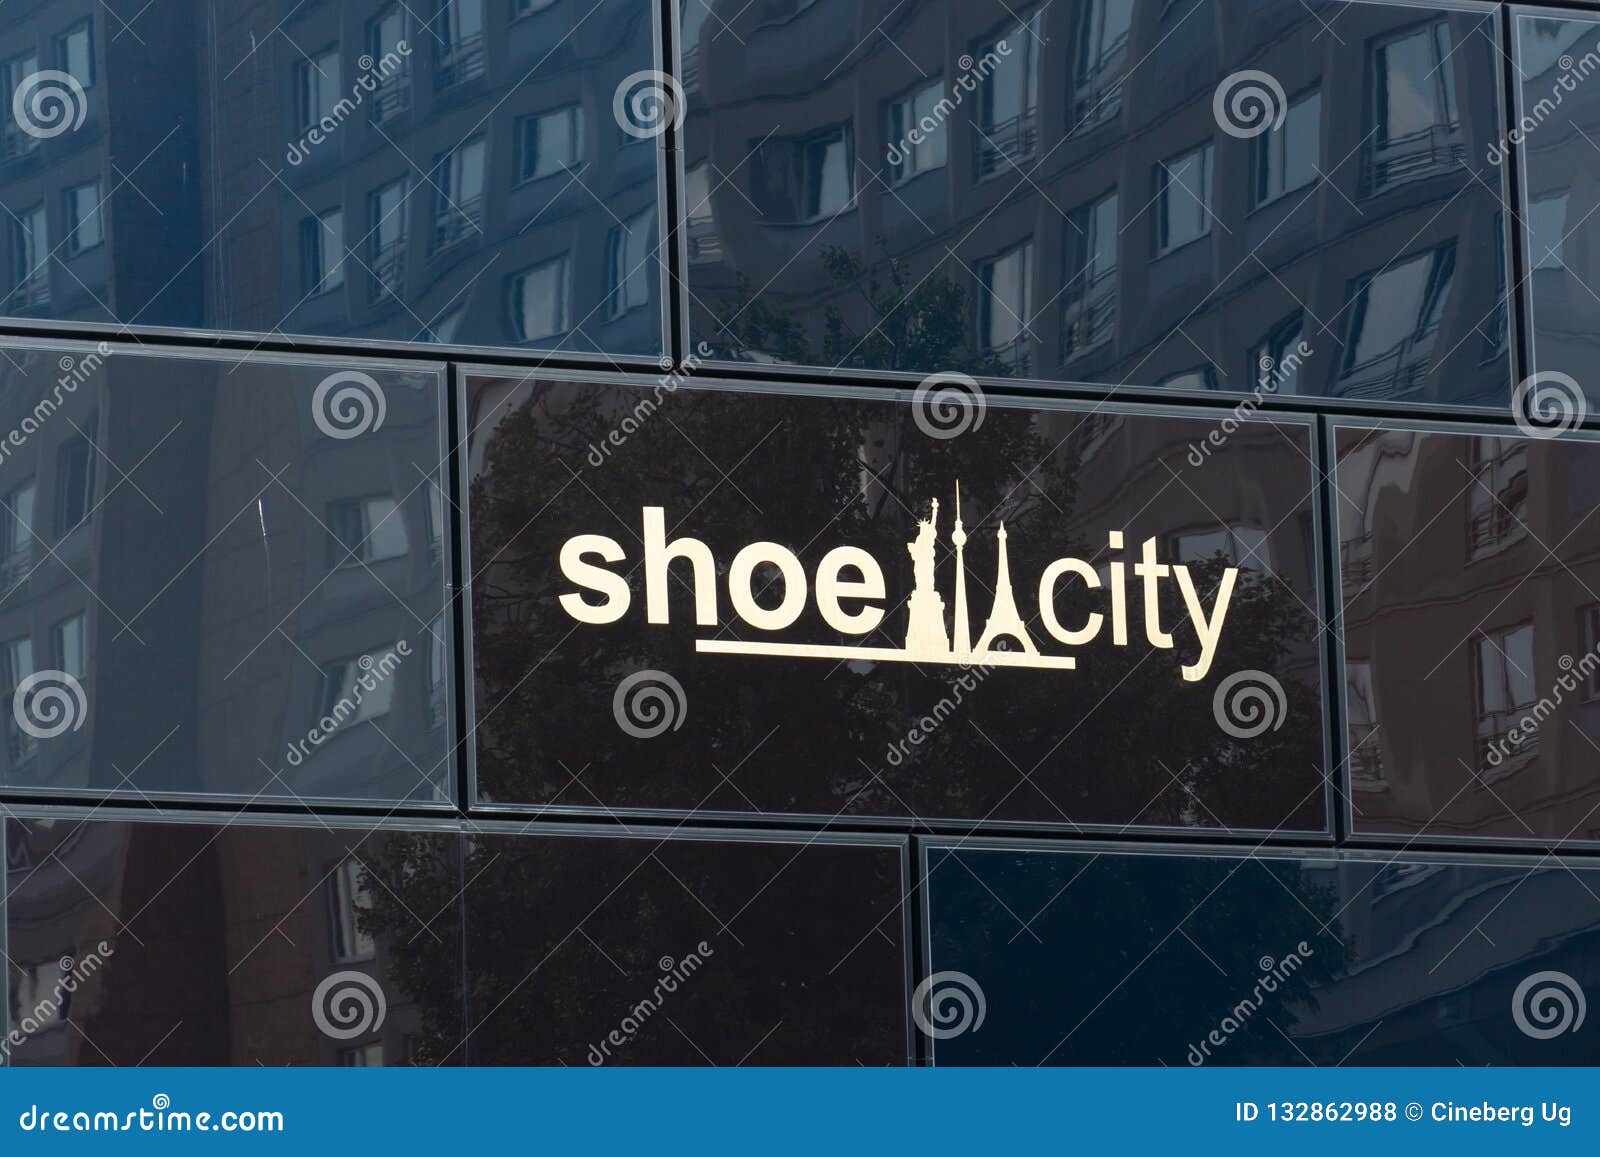 shoe city number